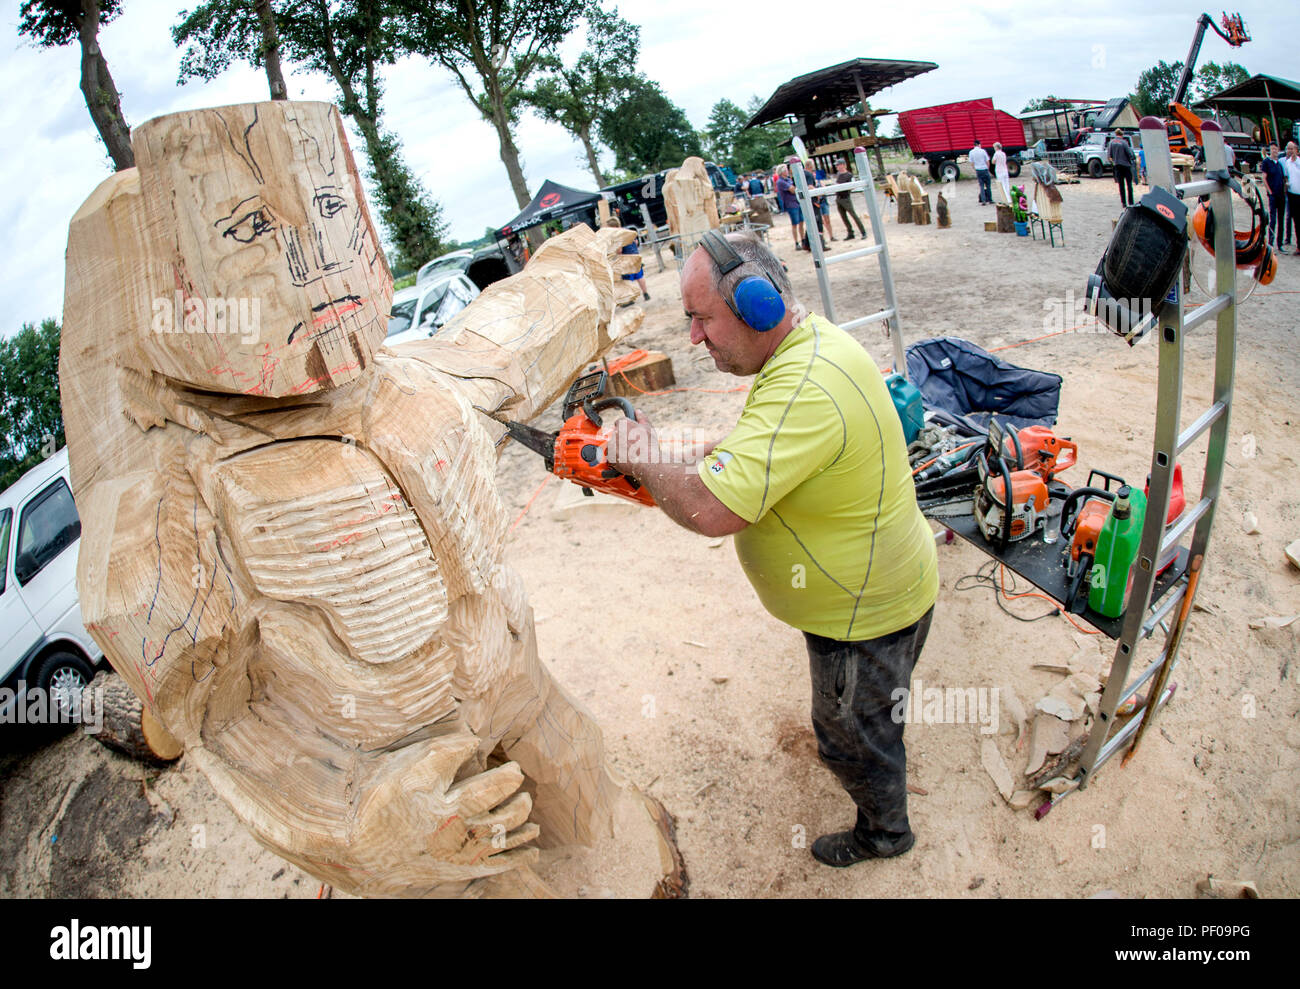 Carving for a cause